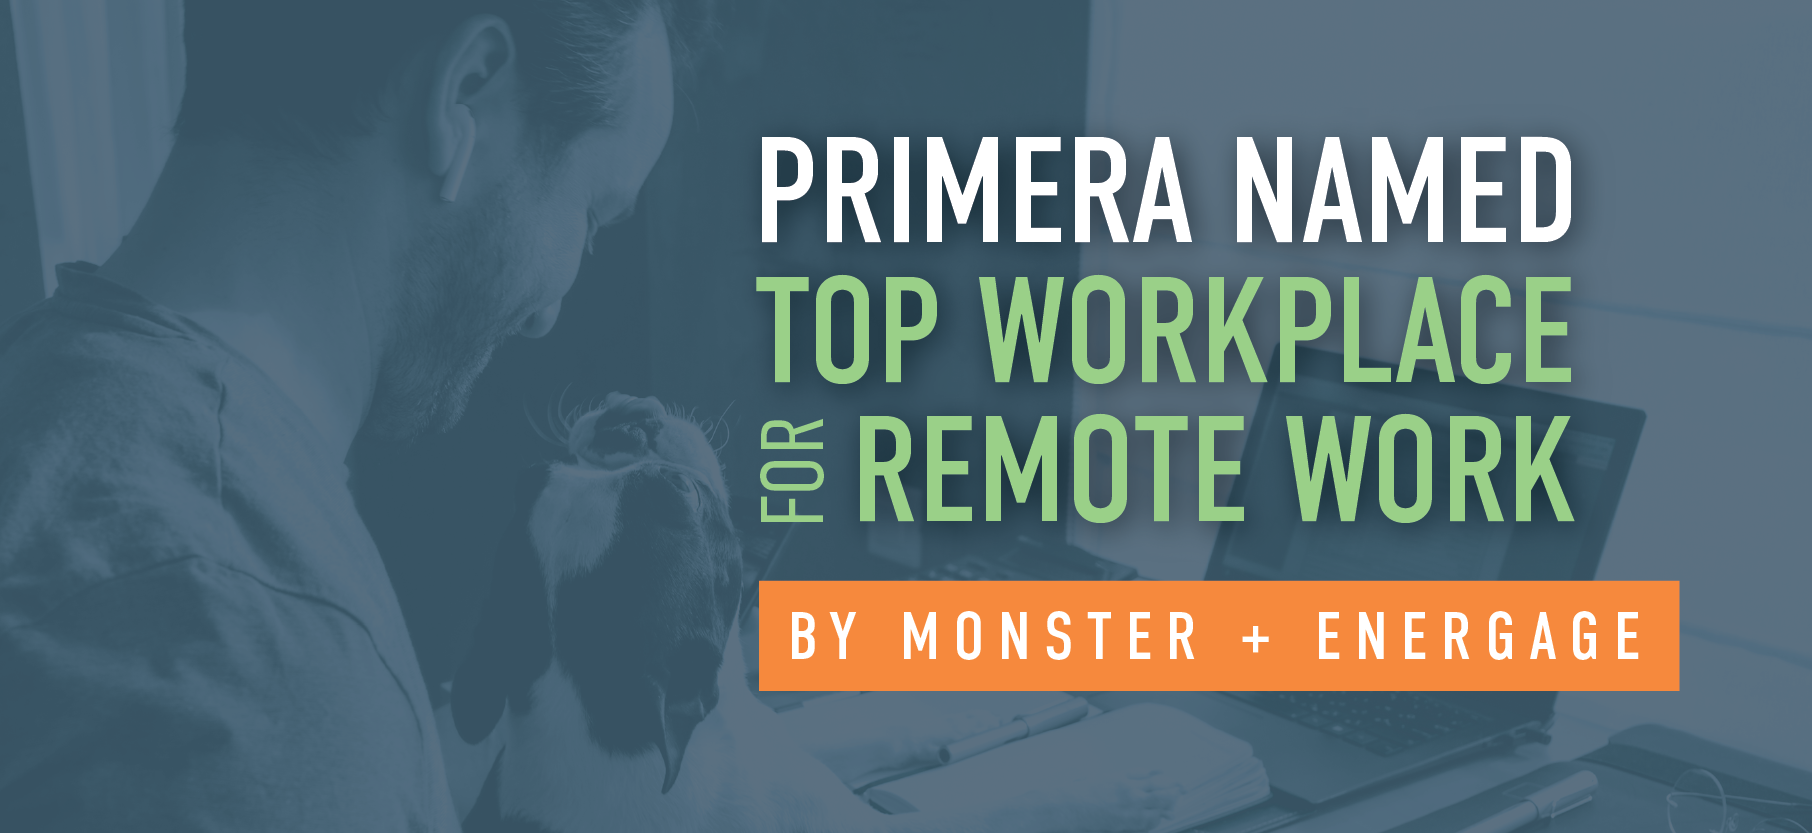 Primera Celebrated as 2024 Top Workplace for Remote Work